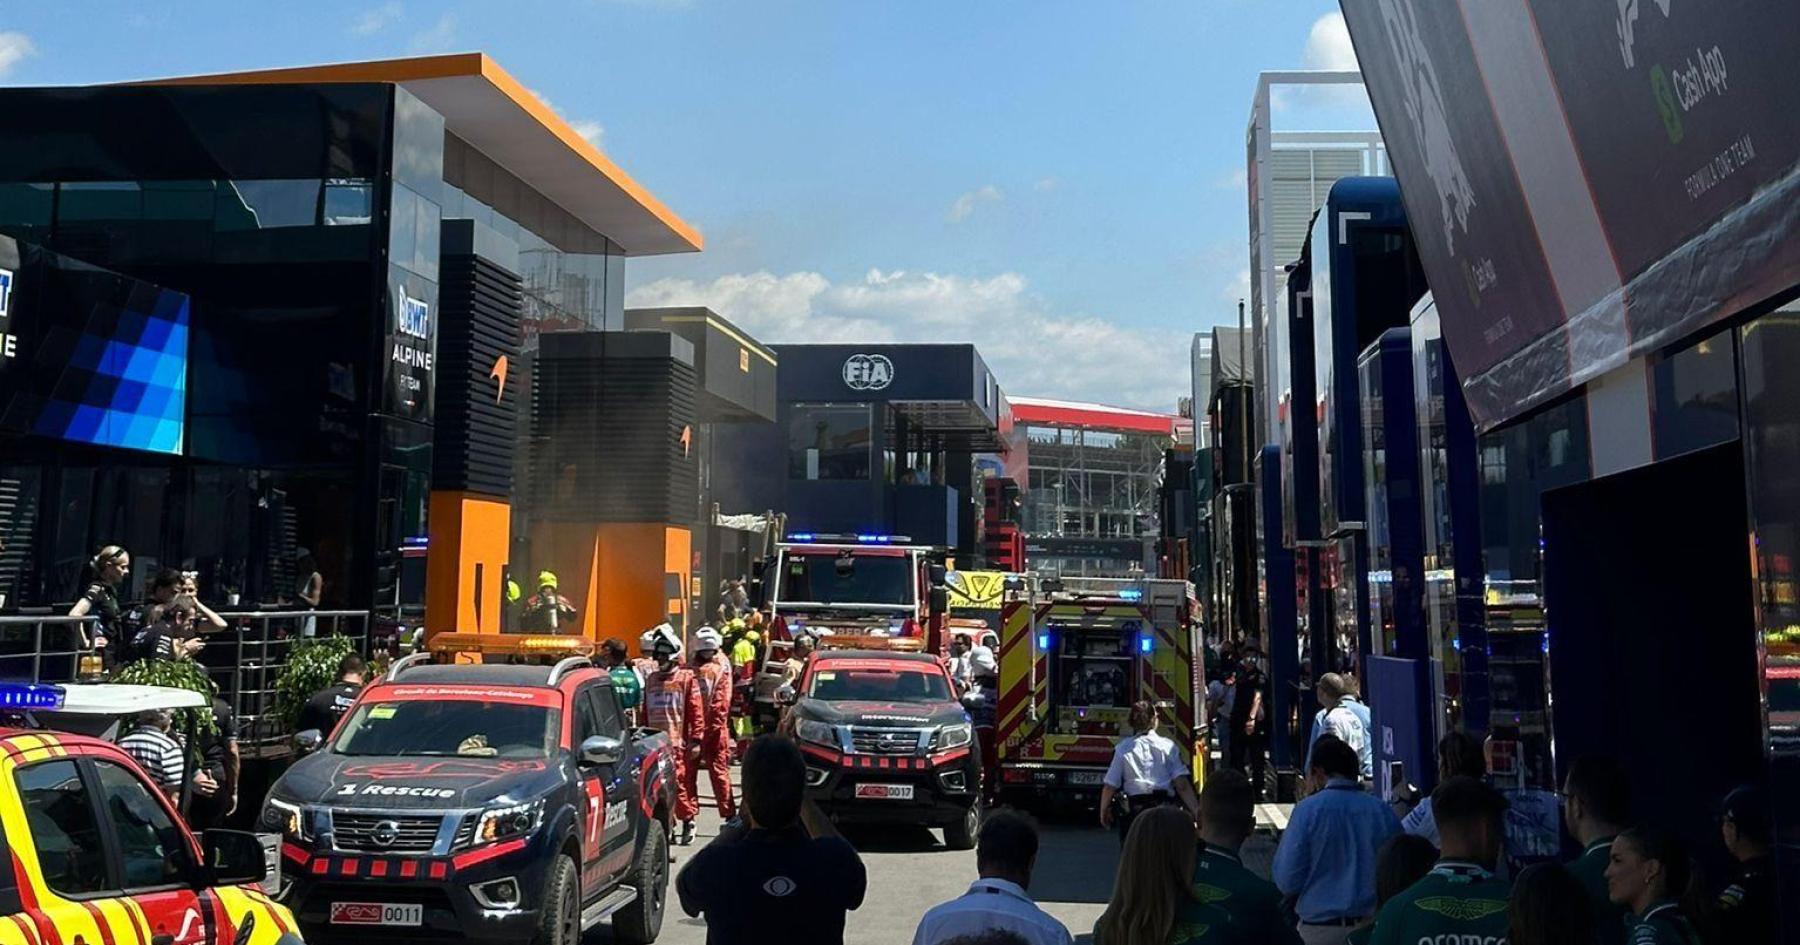 Racing Against the Flames: The McLaren Paddock Fire Incident